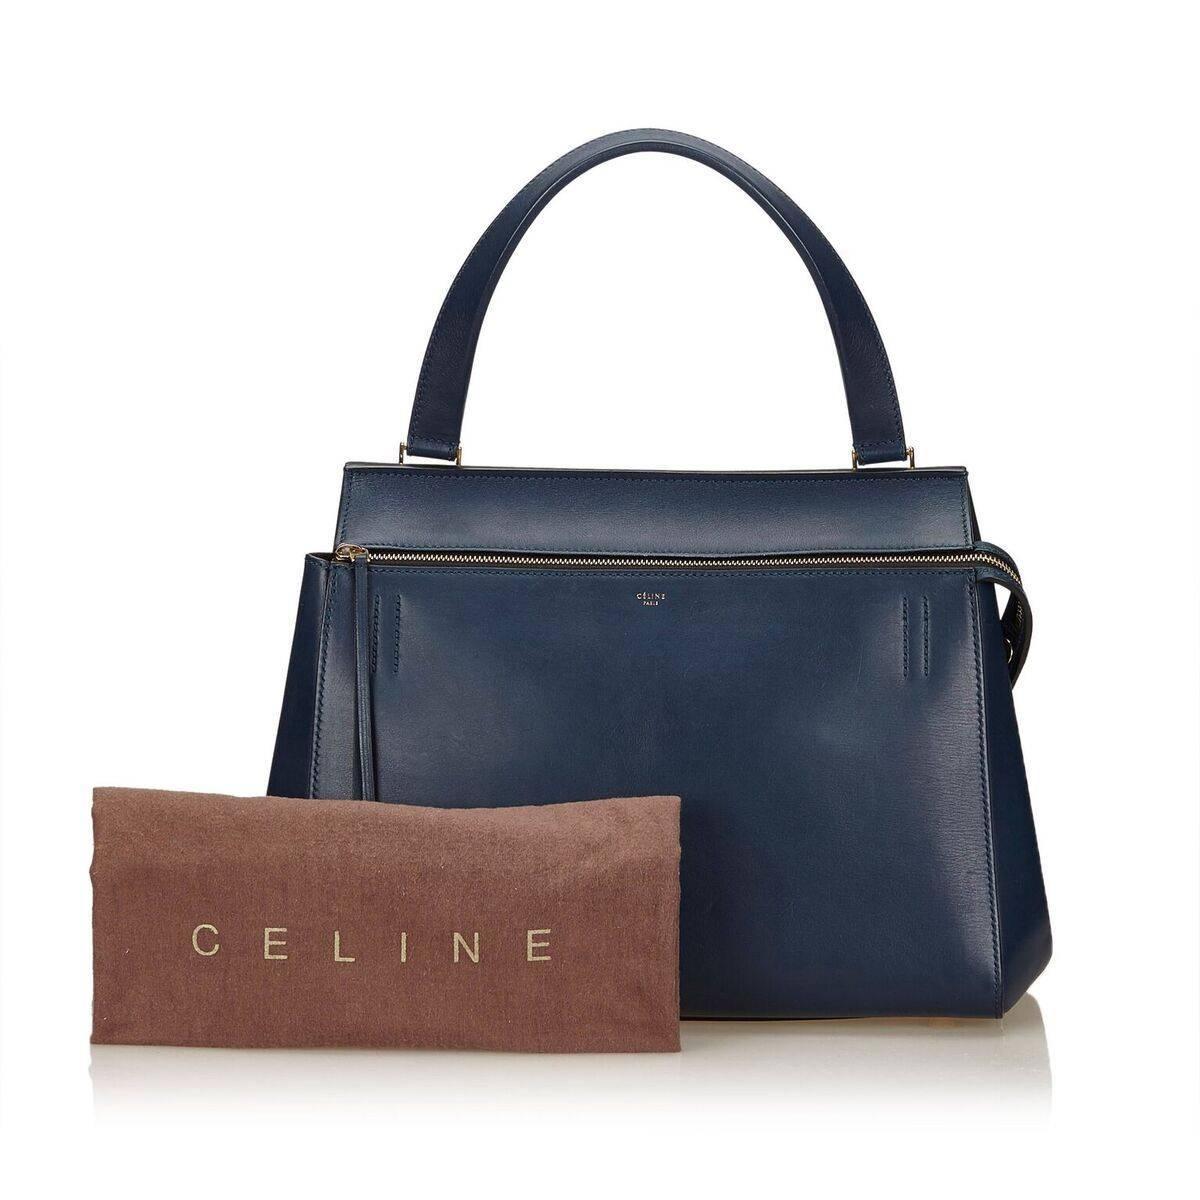 Product details:  Navy blue large leather Edge top-handle bag by Celine.  Top zip closure.  Leather interior with inner slide pockets.  Back exterior snap pocket.  Protective metal feet.  Goldtone hardware.  Dust bag included.  11